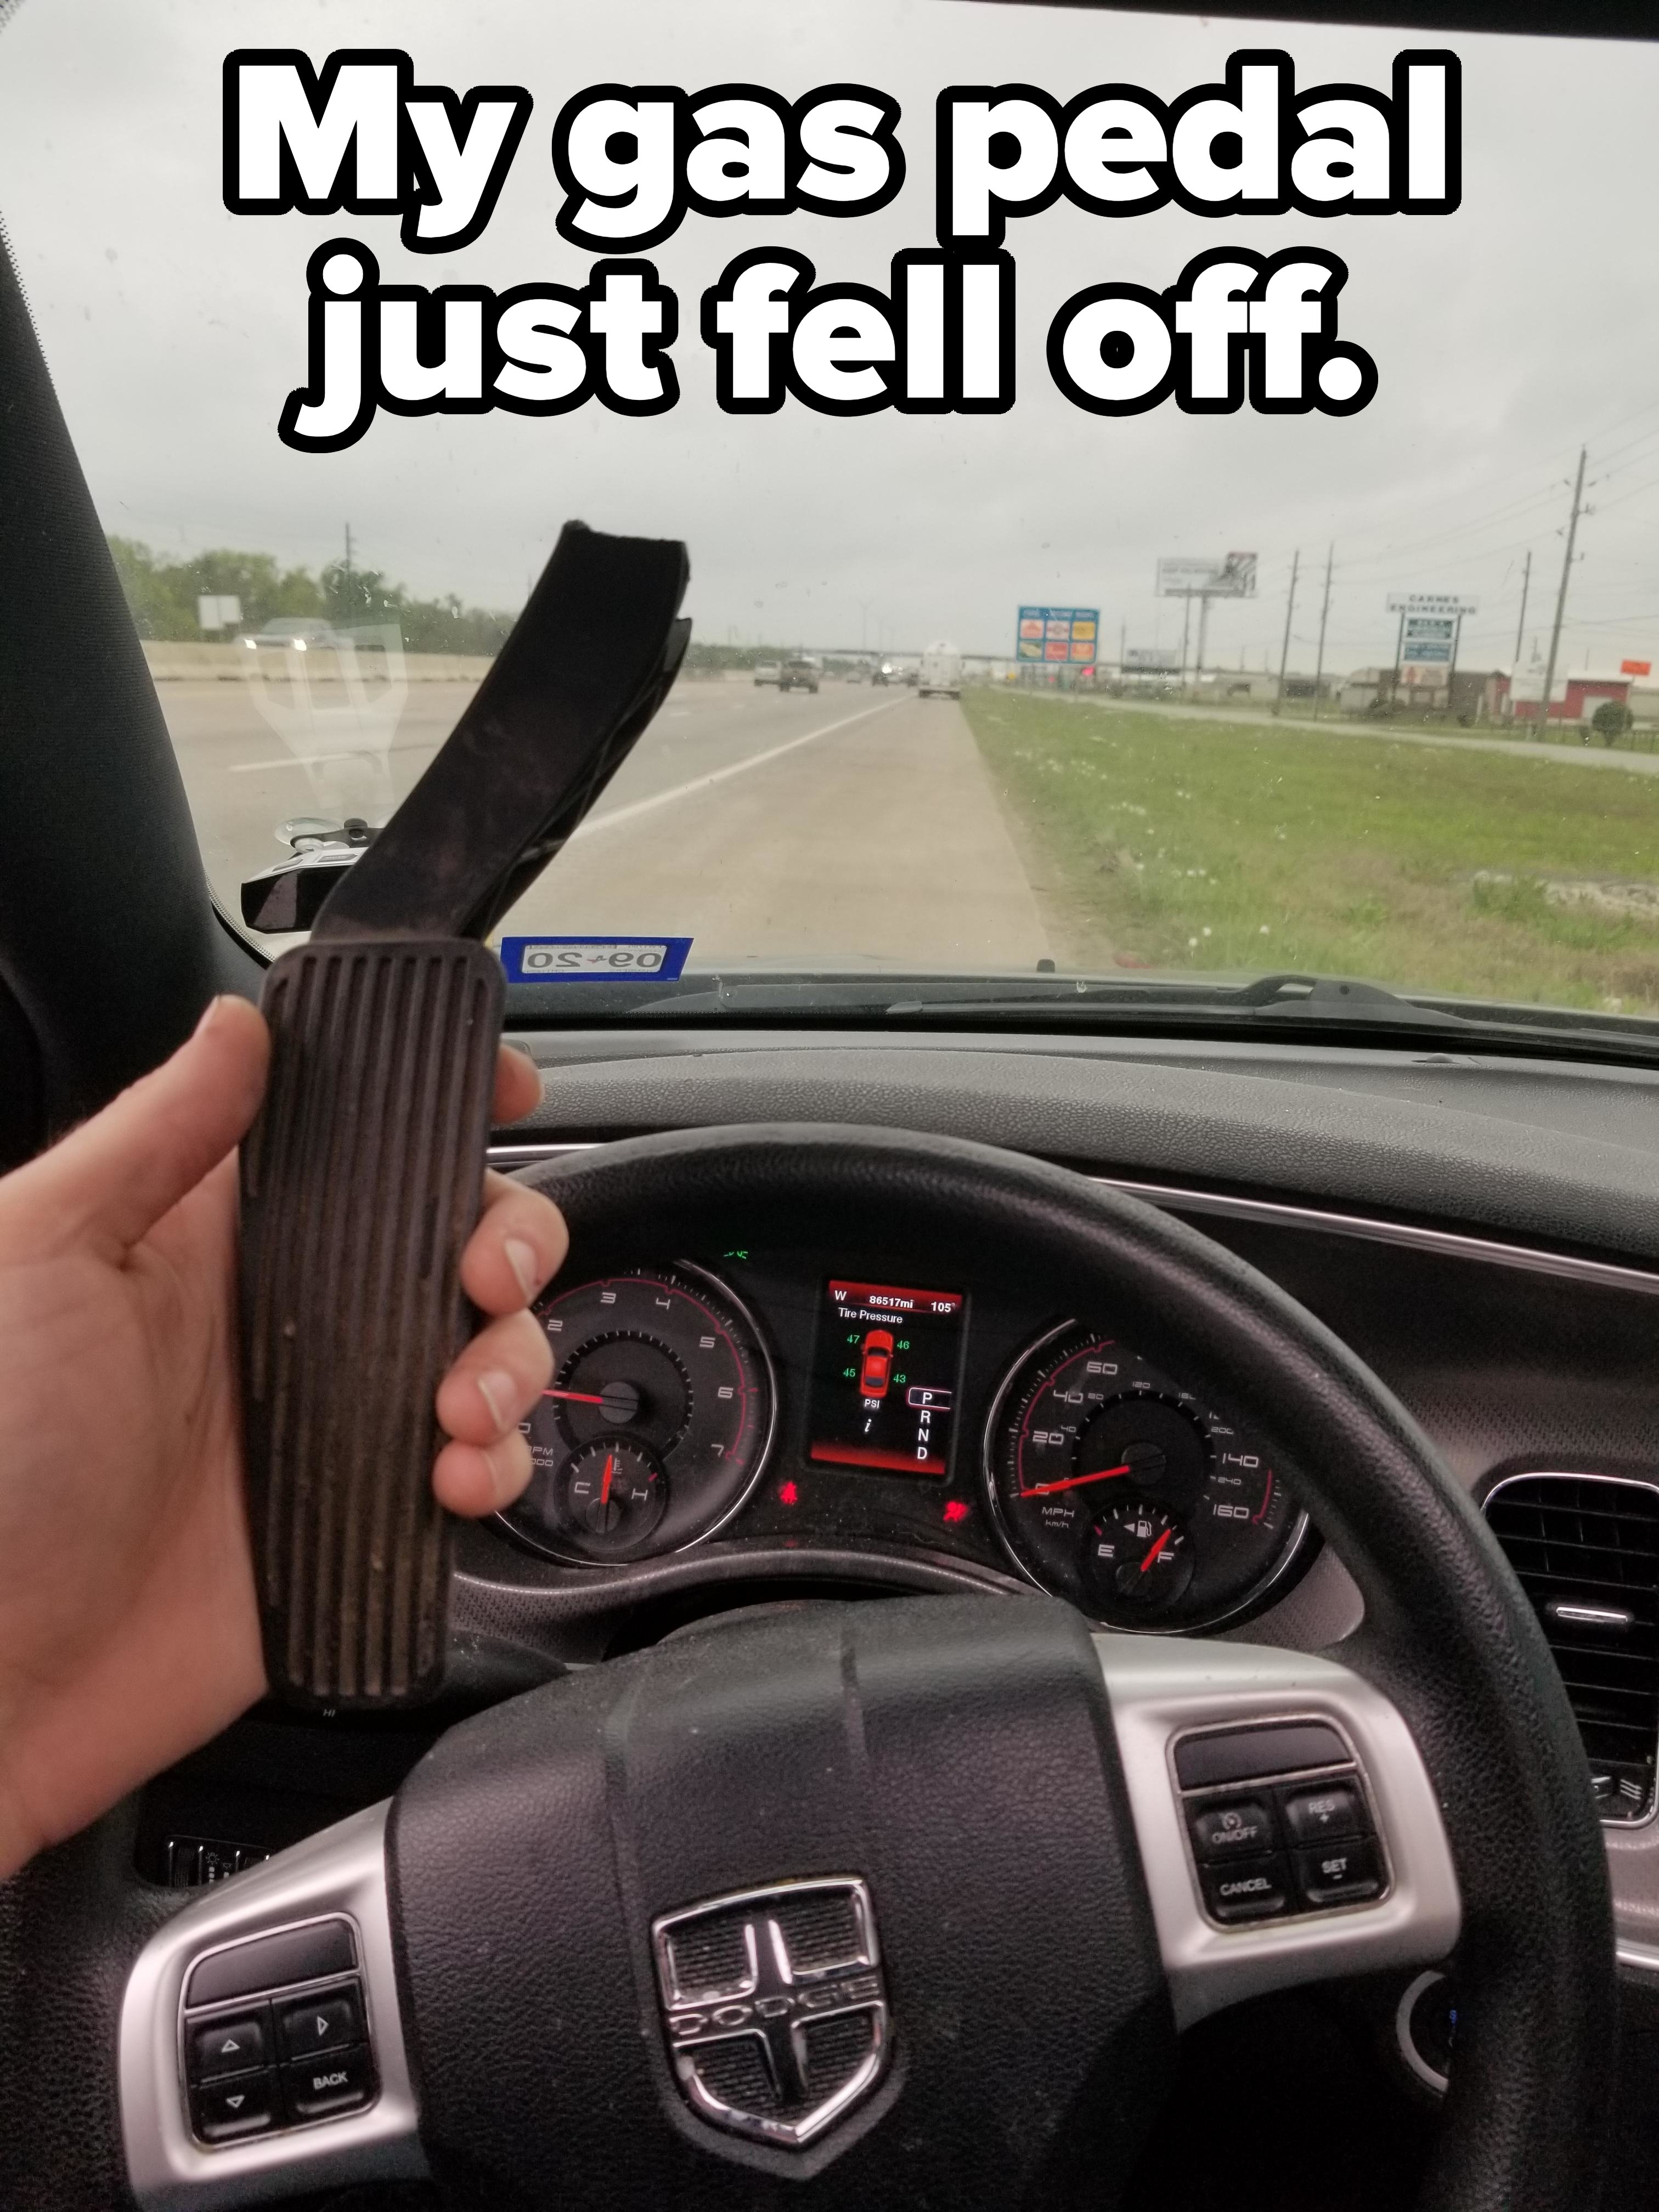 &quot;My gas pedal just fell off&quot;: A person holding up a gas pedal in the driver&#x27;s seat